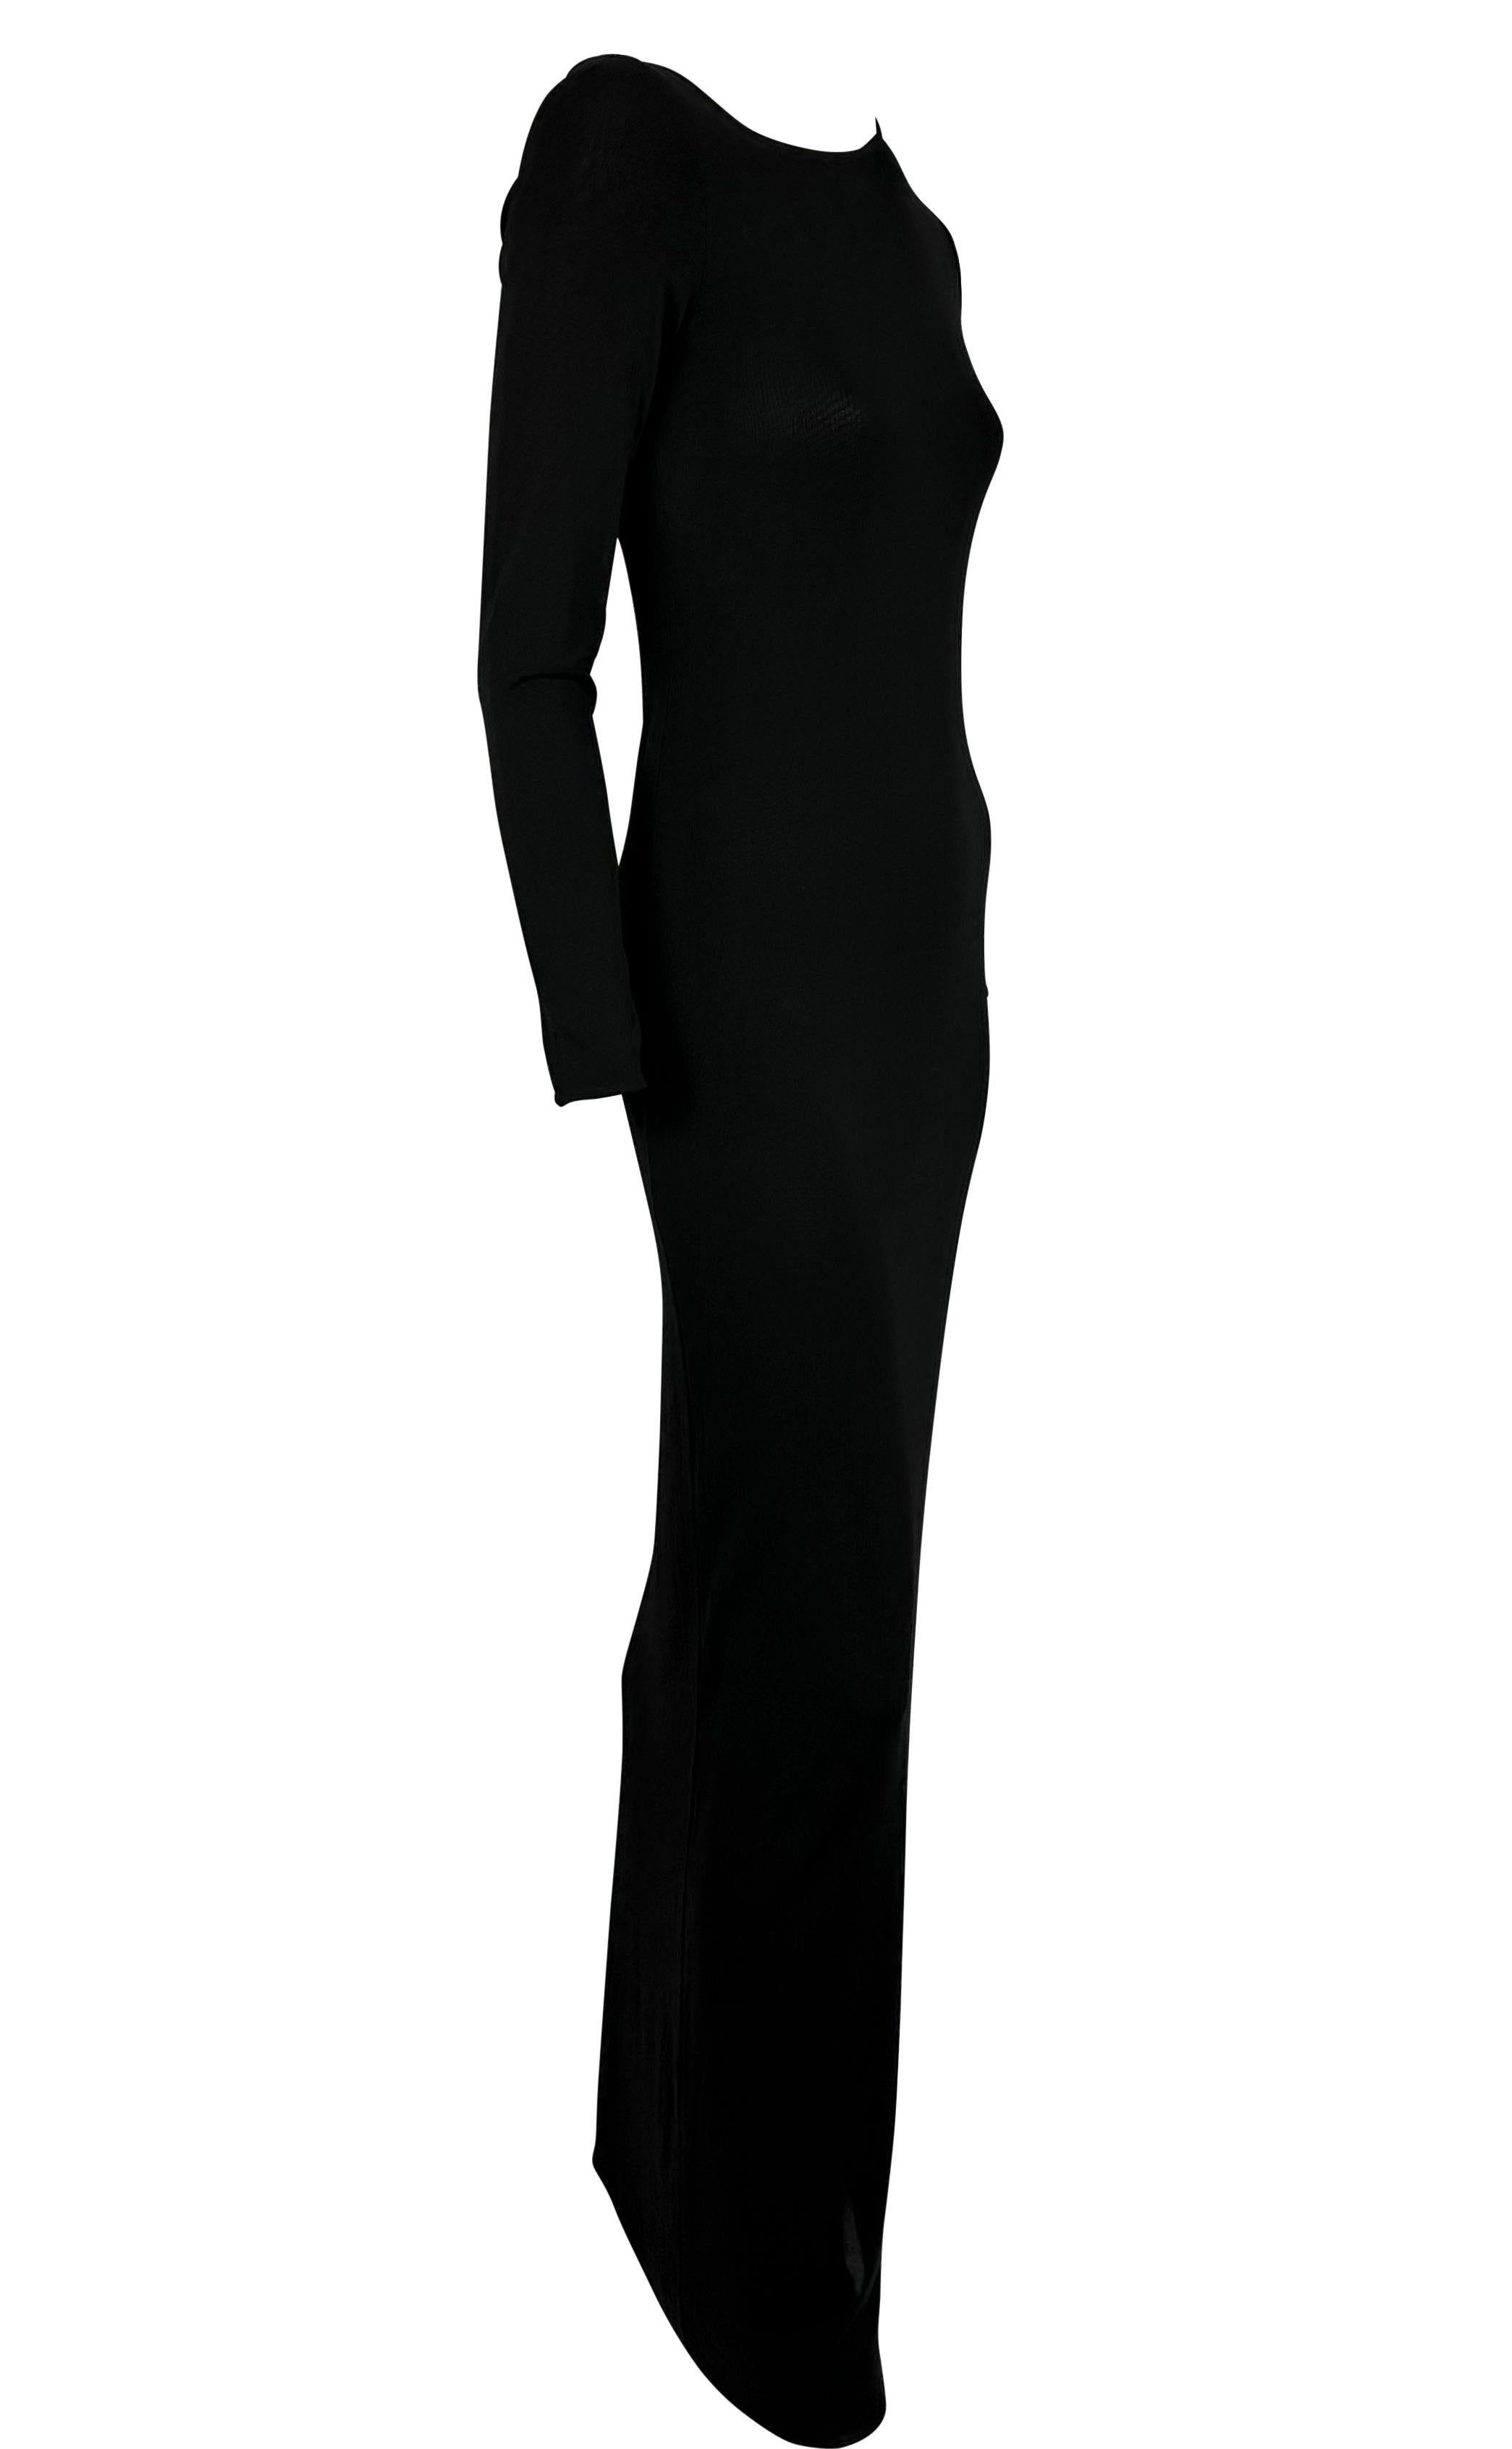 NWT S/S 1998 Gucci by Tom Ford Asymmetric Neckline Black Jersey Stretch Gown For Sale 2